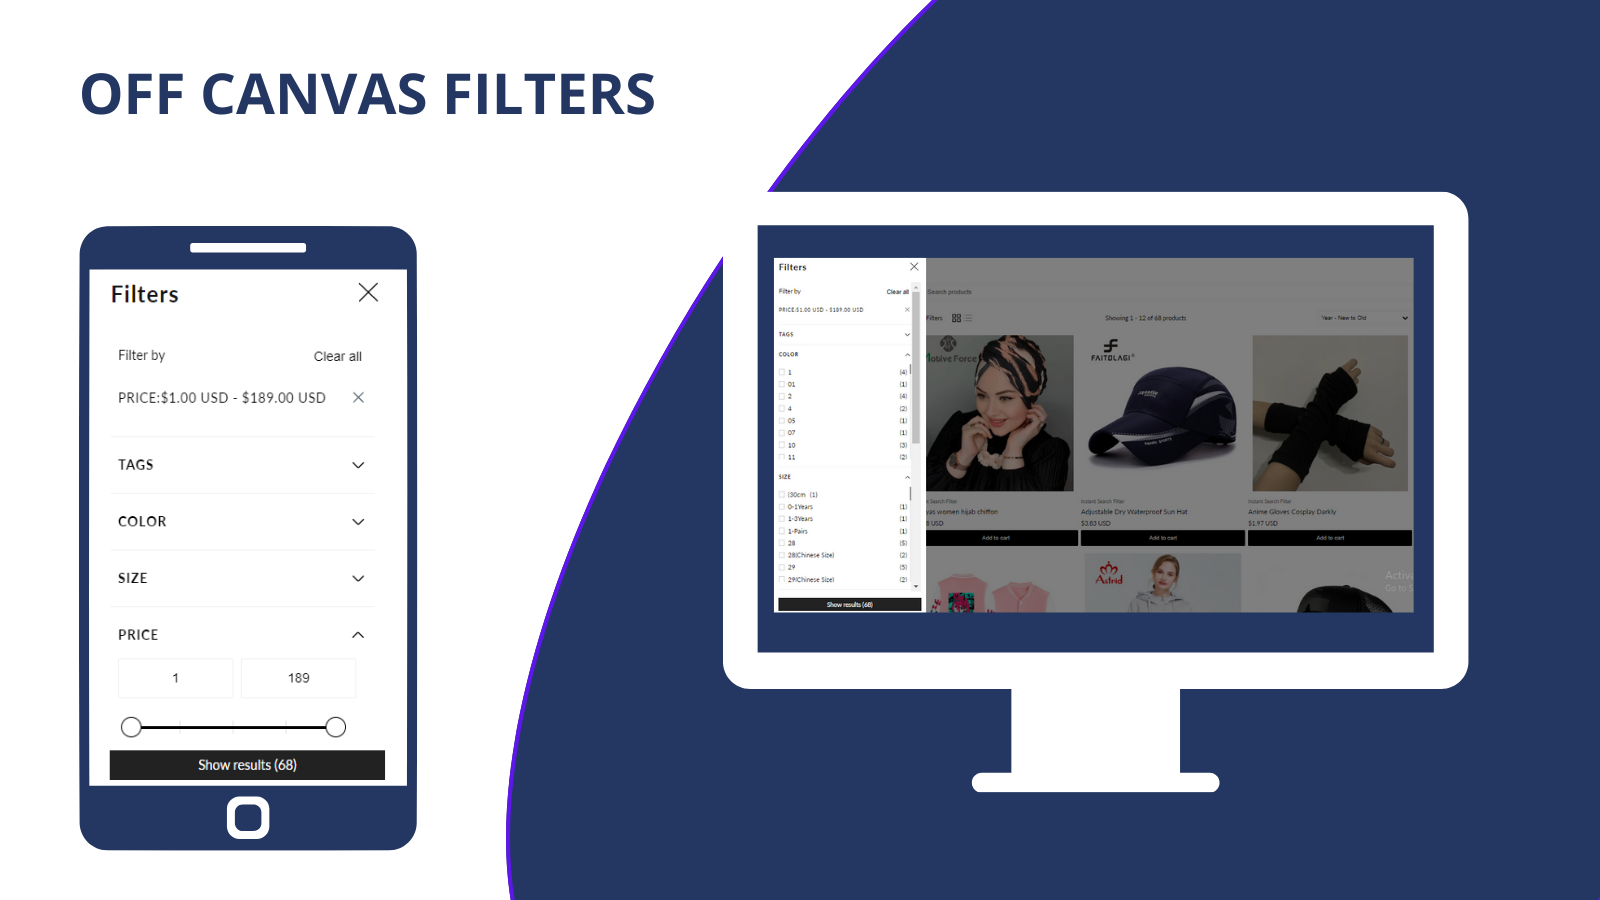 Product filter, collection filter